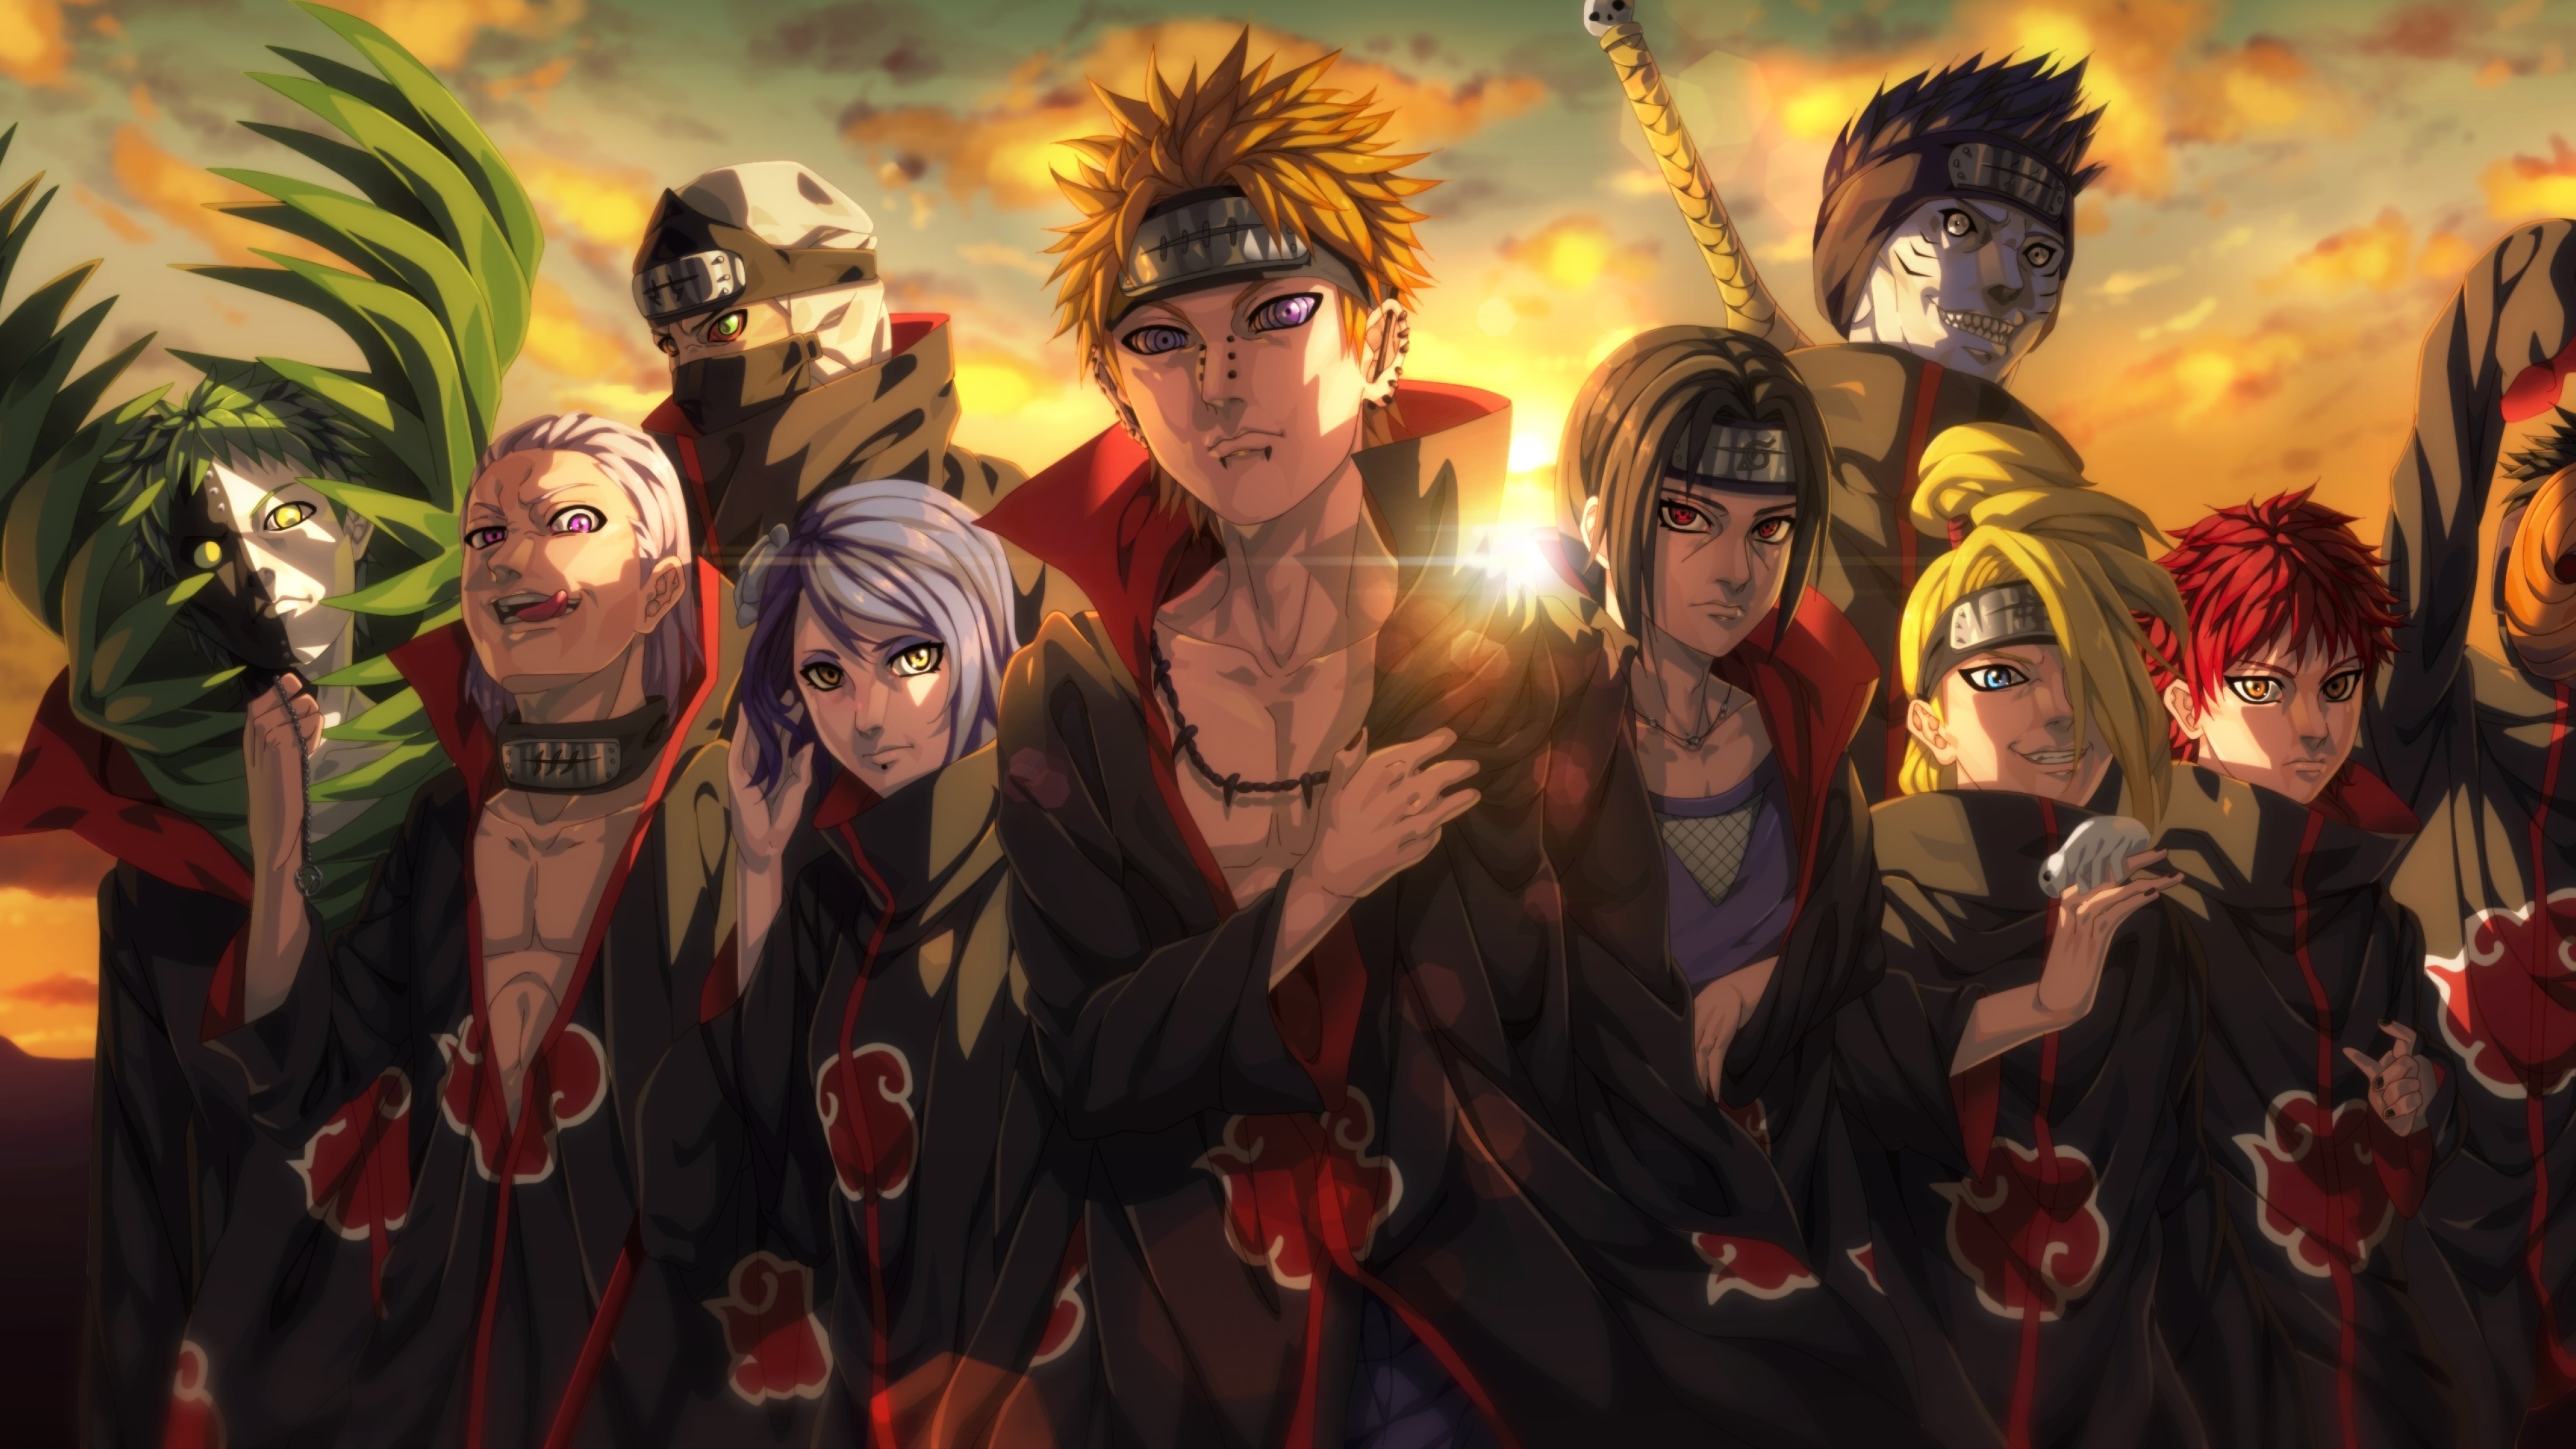 Download Anime Wallpaper Pc 4K Naruto Background - My Anime List